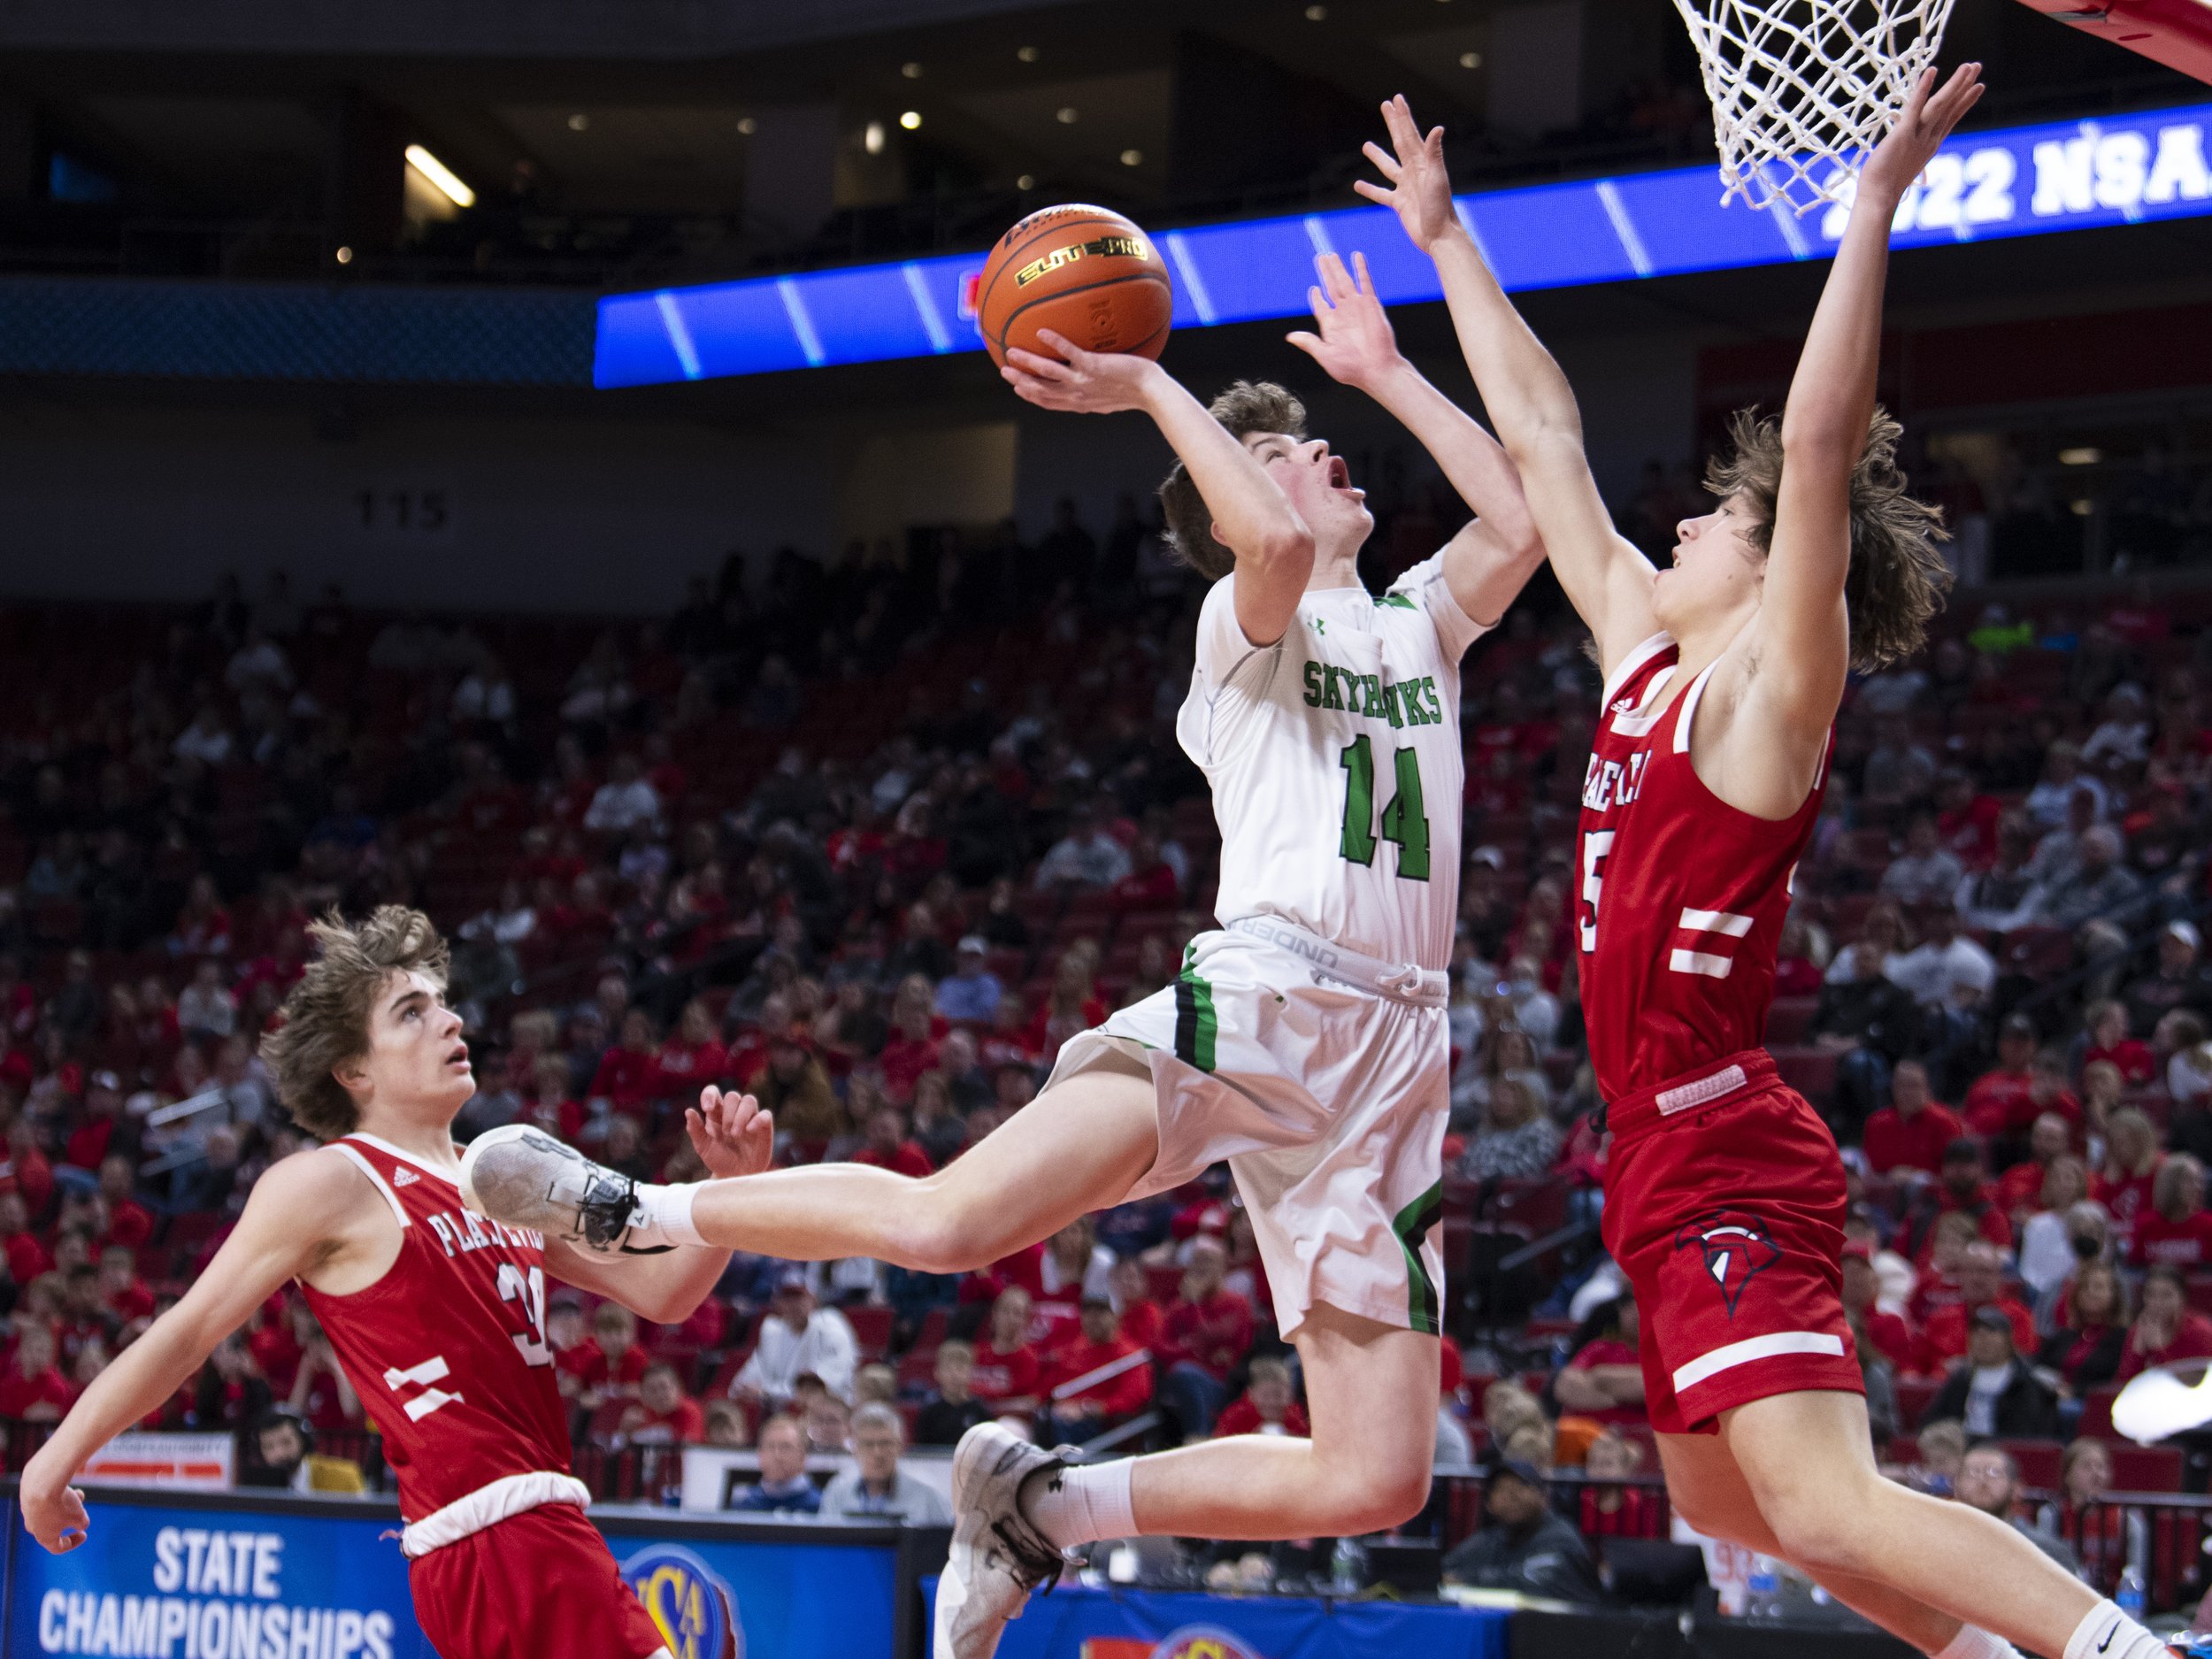  Omaha Skutt's Benjamin Teal (center) goes up for a shot against Platteview's Anthony Lewis (right) in the fourth quarter during a Class B boys semifinal game at Pinnacle Bank Arena on March 9, 2022, in Lincoln, Nebraska. 